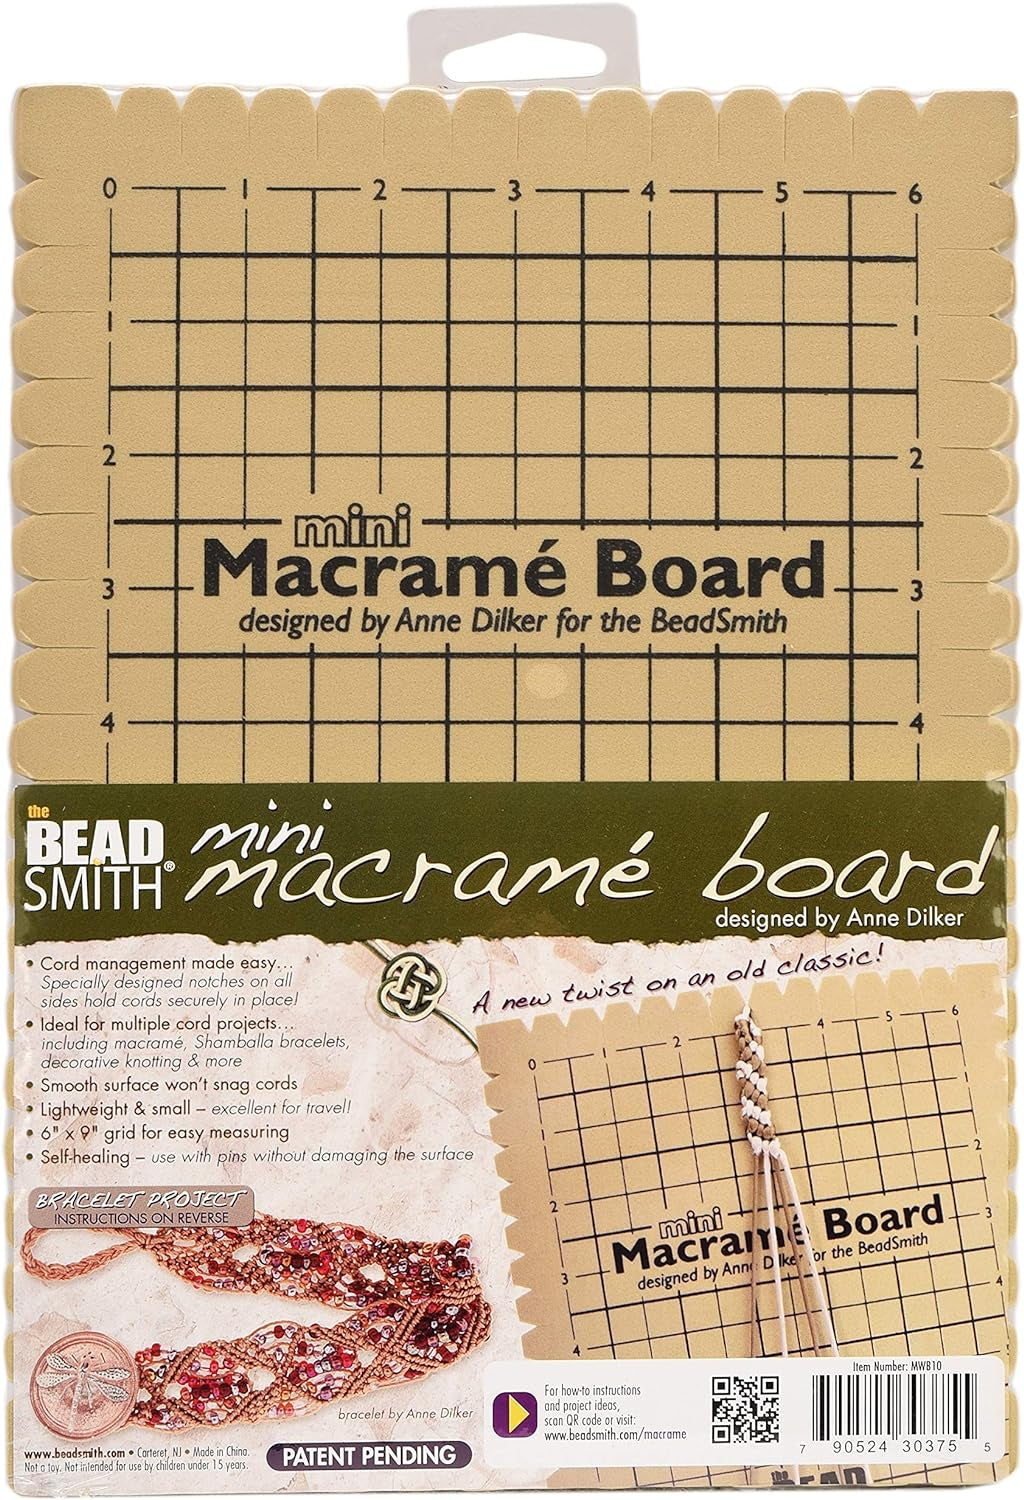 Mini Macrame Board, 7.5 X 10.5 Inches, 0.5-Inch-Thick Foam, 6 X 9" Grid for Measuring, Bracelet Project with Instructions Included, Create Macrame and Knotting Creations